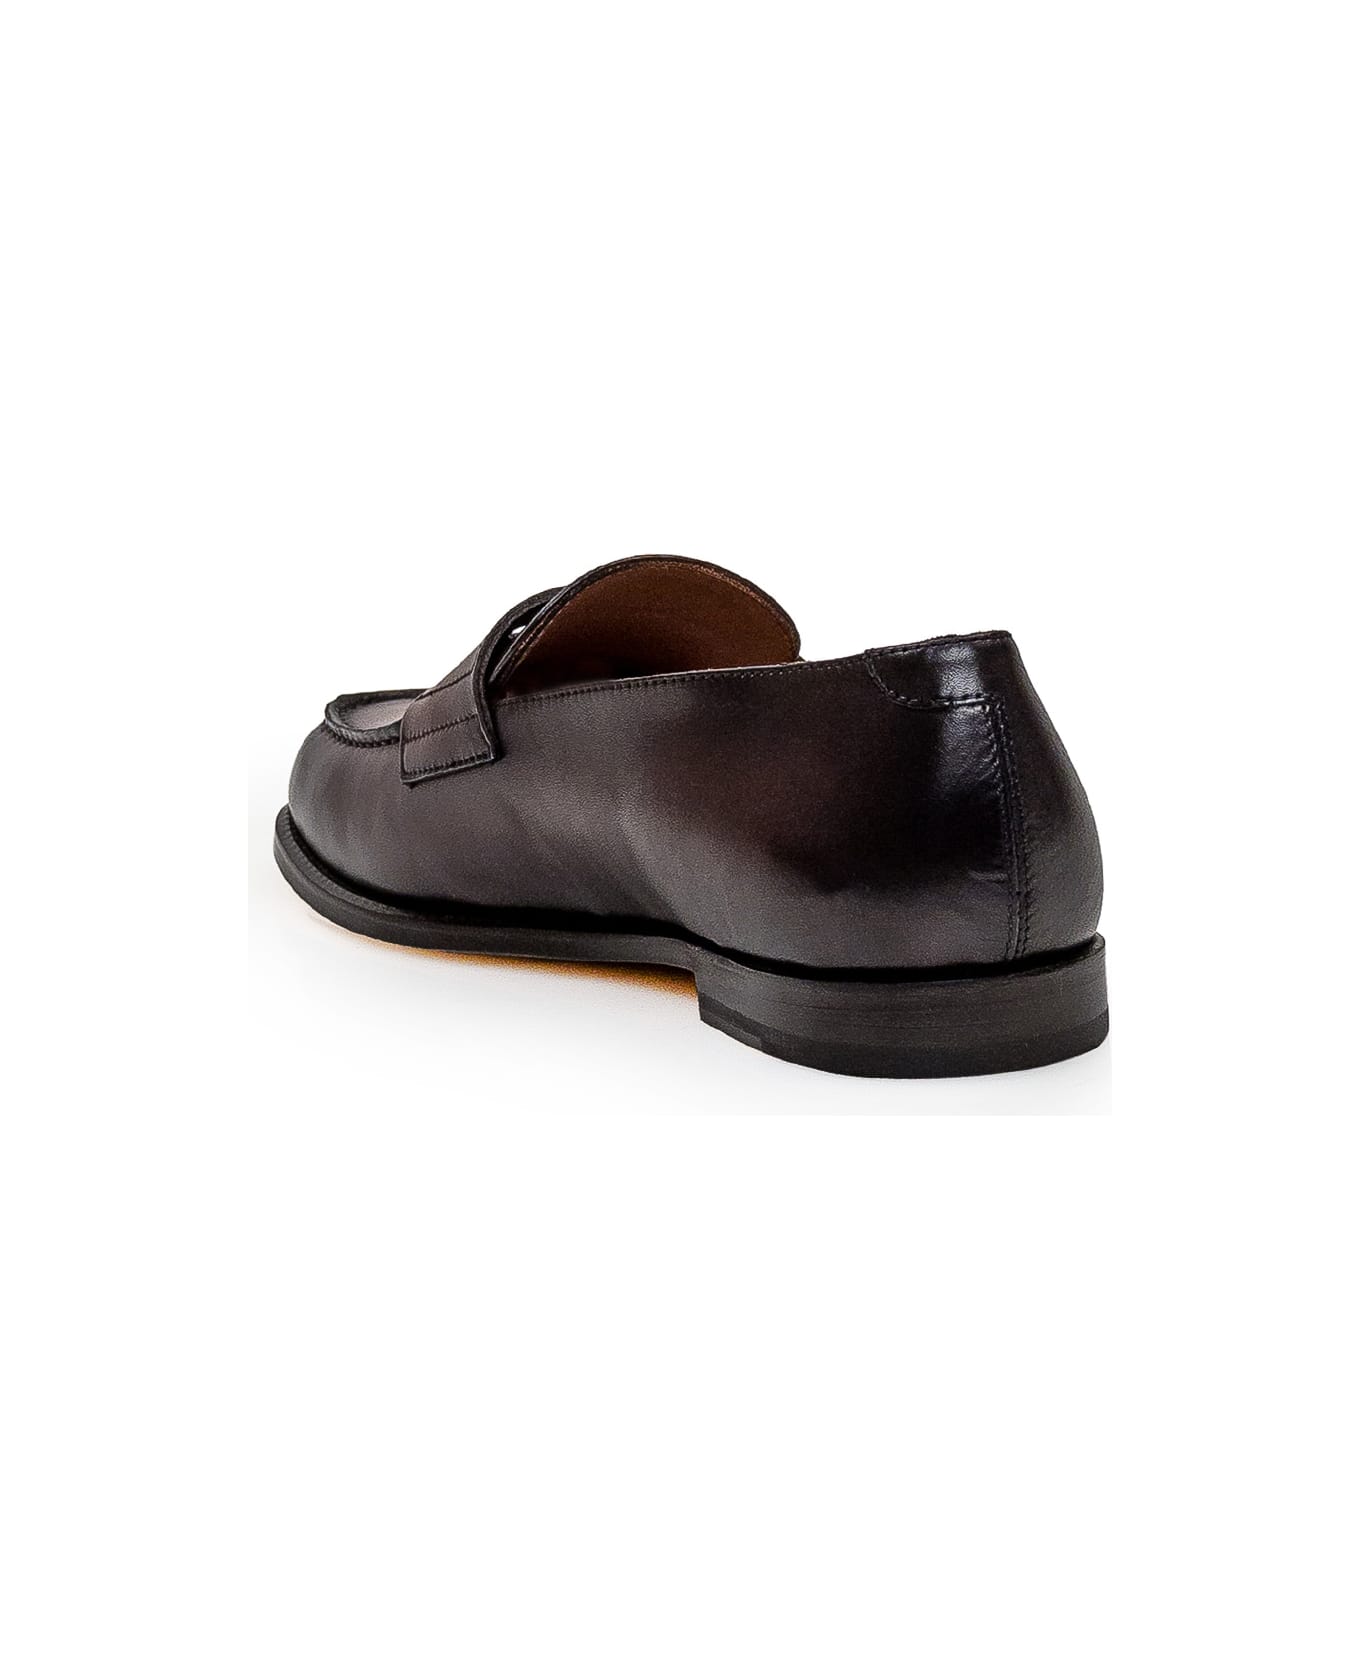 Doucal's Leather Loafer - T MORO SCURO-FDO T.MORO